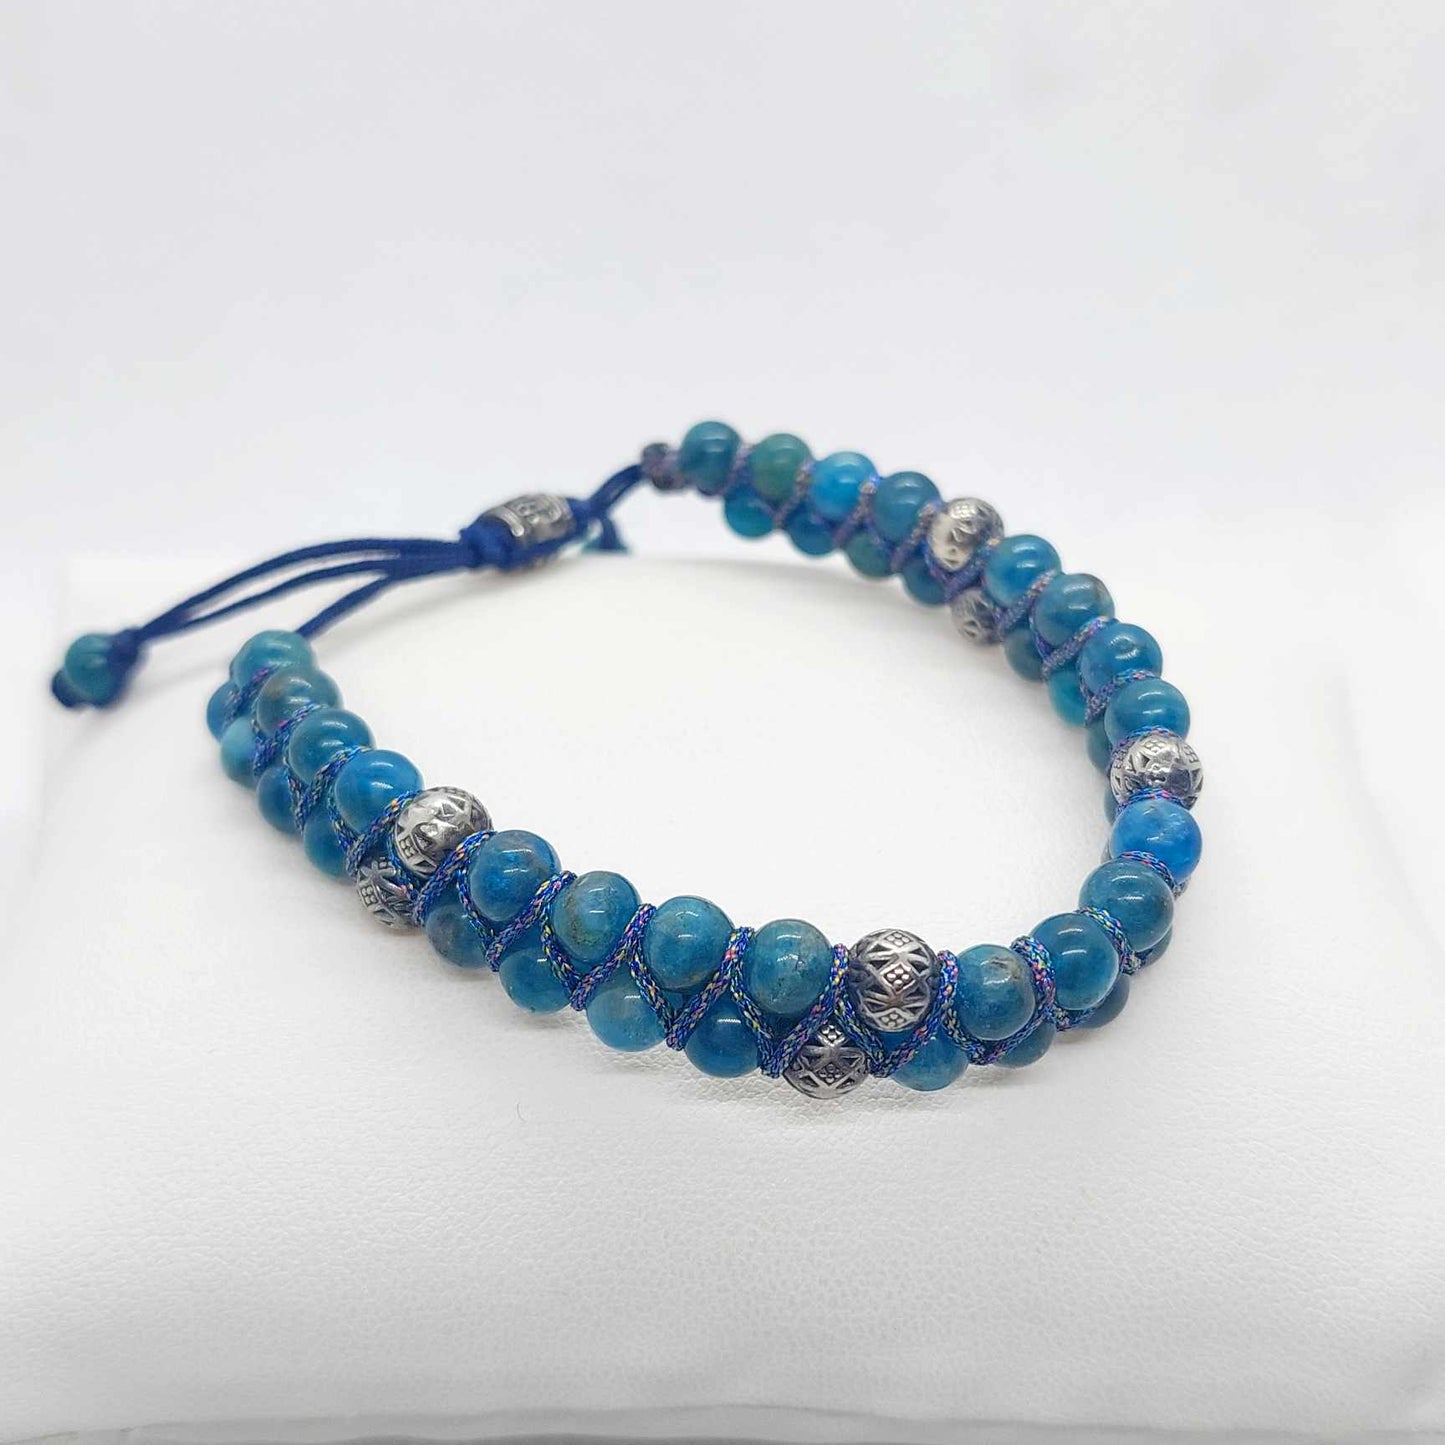 Black Braided with Lapis and Apatite Bead Bracelet for Men